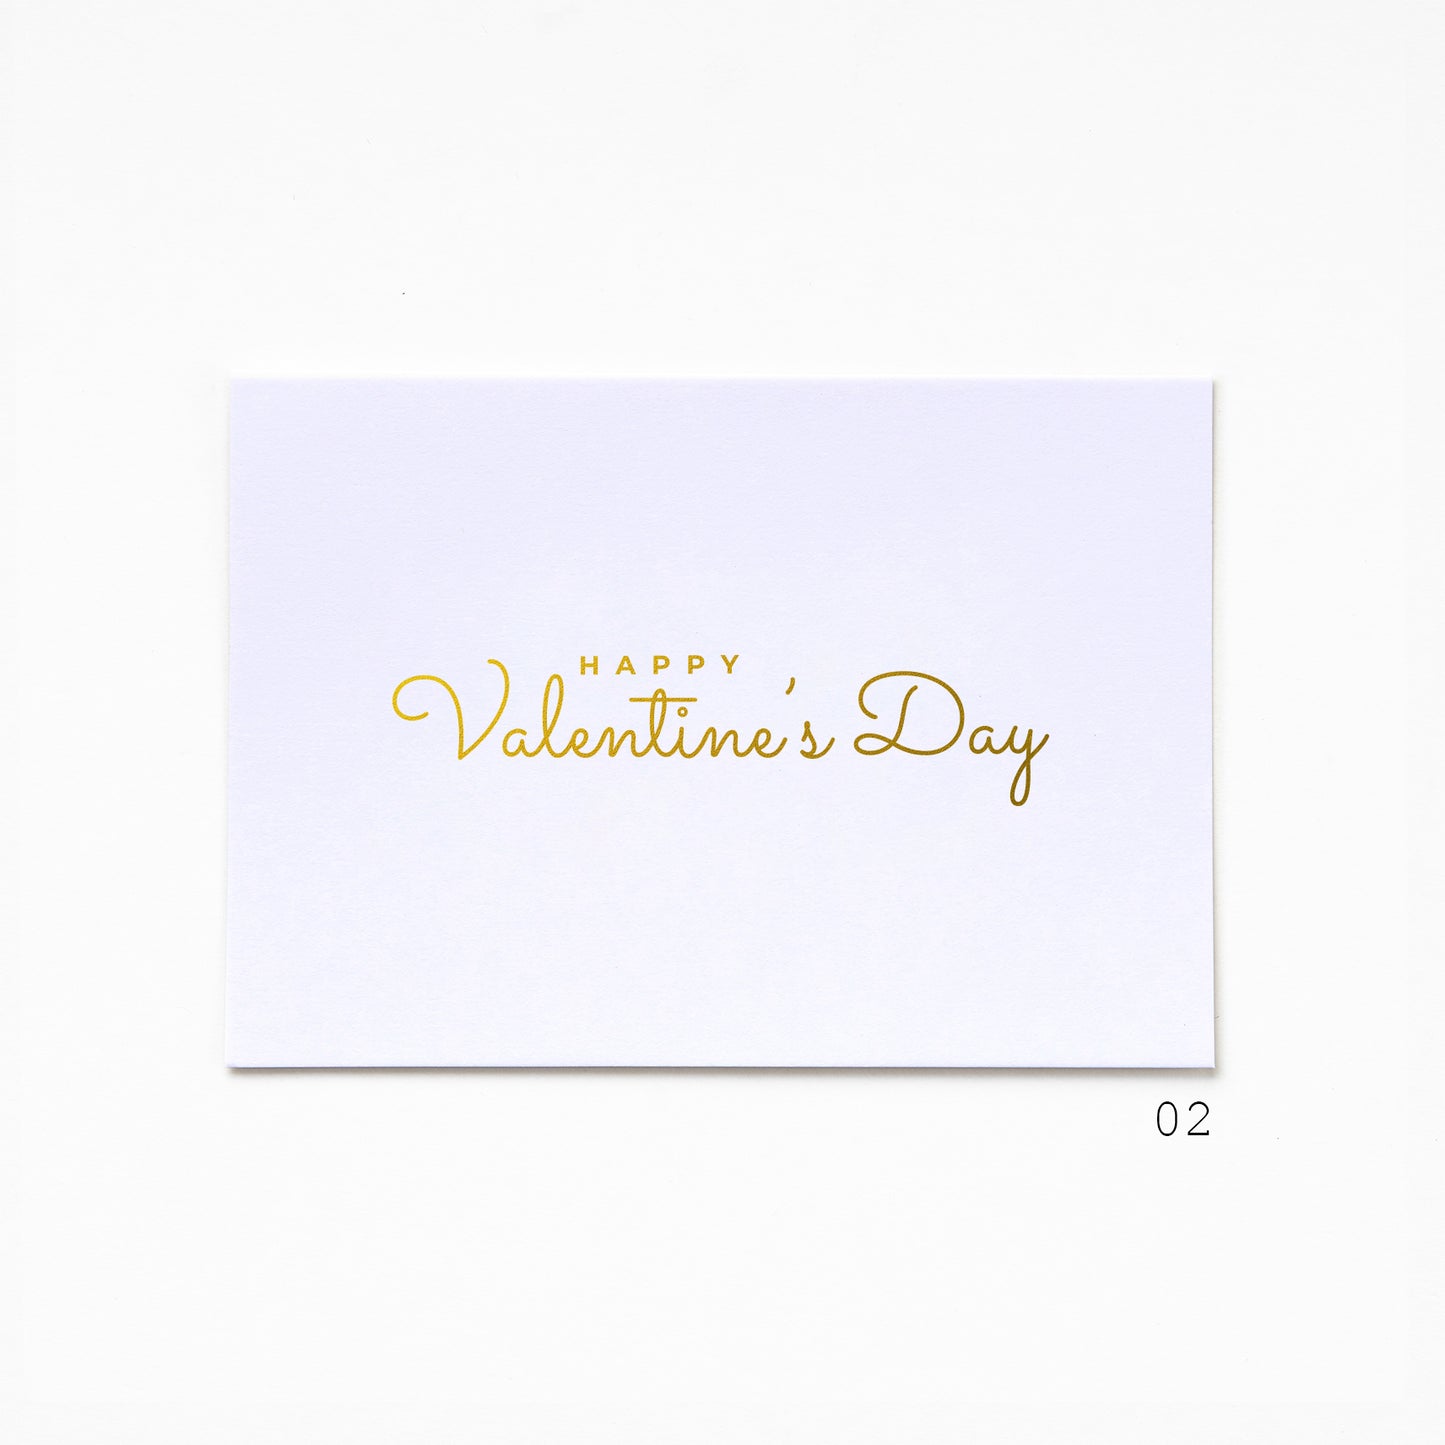 A6 Greeting Card - Happy Valentine's Day 02